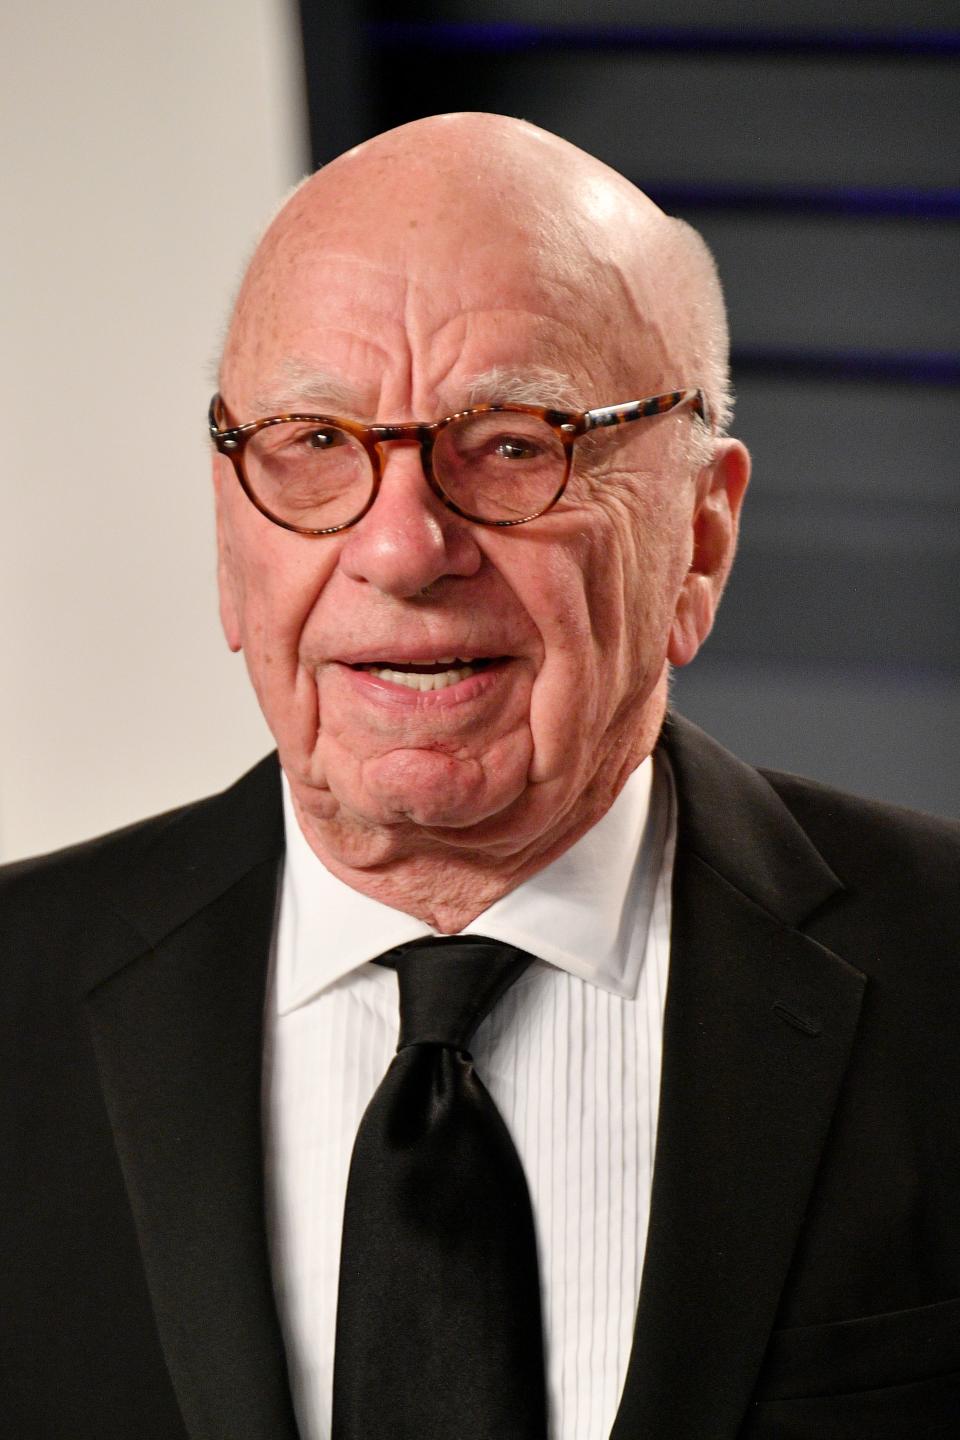 Rupert Murdoch is stepping down as chairman of News Corp. and Fox Corp., which owns Fox News. Our critic says that's unlikely to change the conservative-leaning channel.